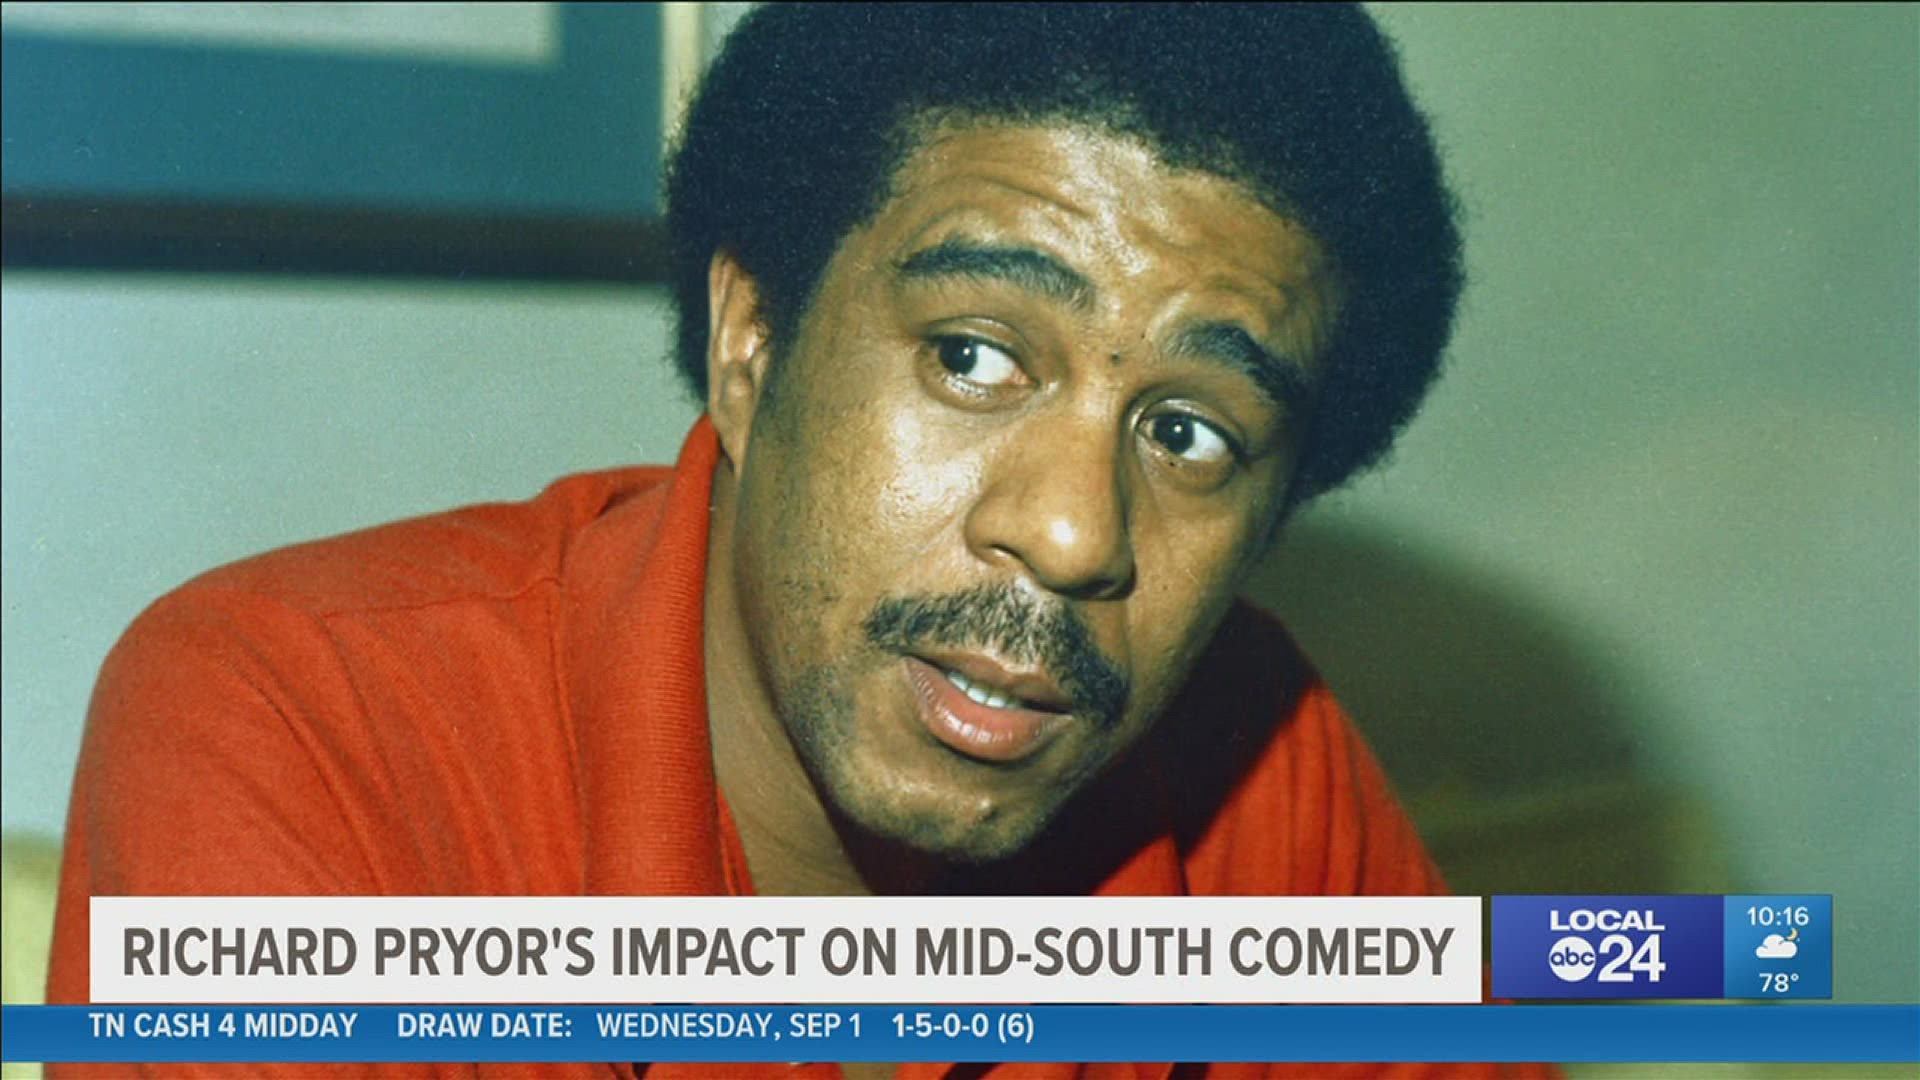 Local comedians reflect on the legacy left by Richard Pryor, known as one of the greatest comedians of all time.